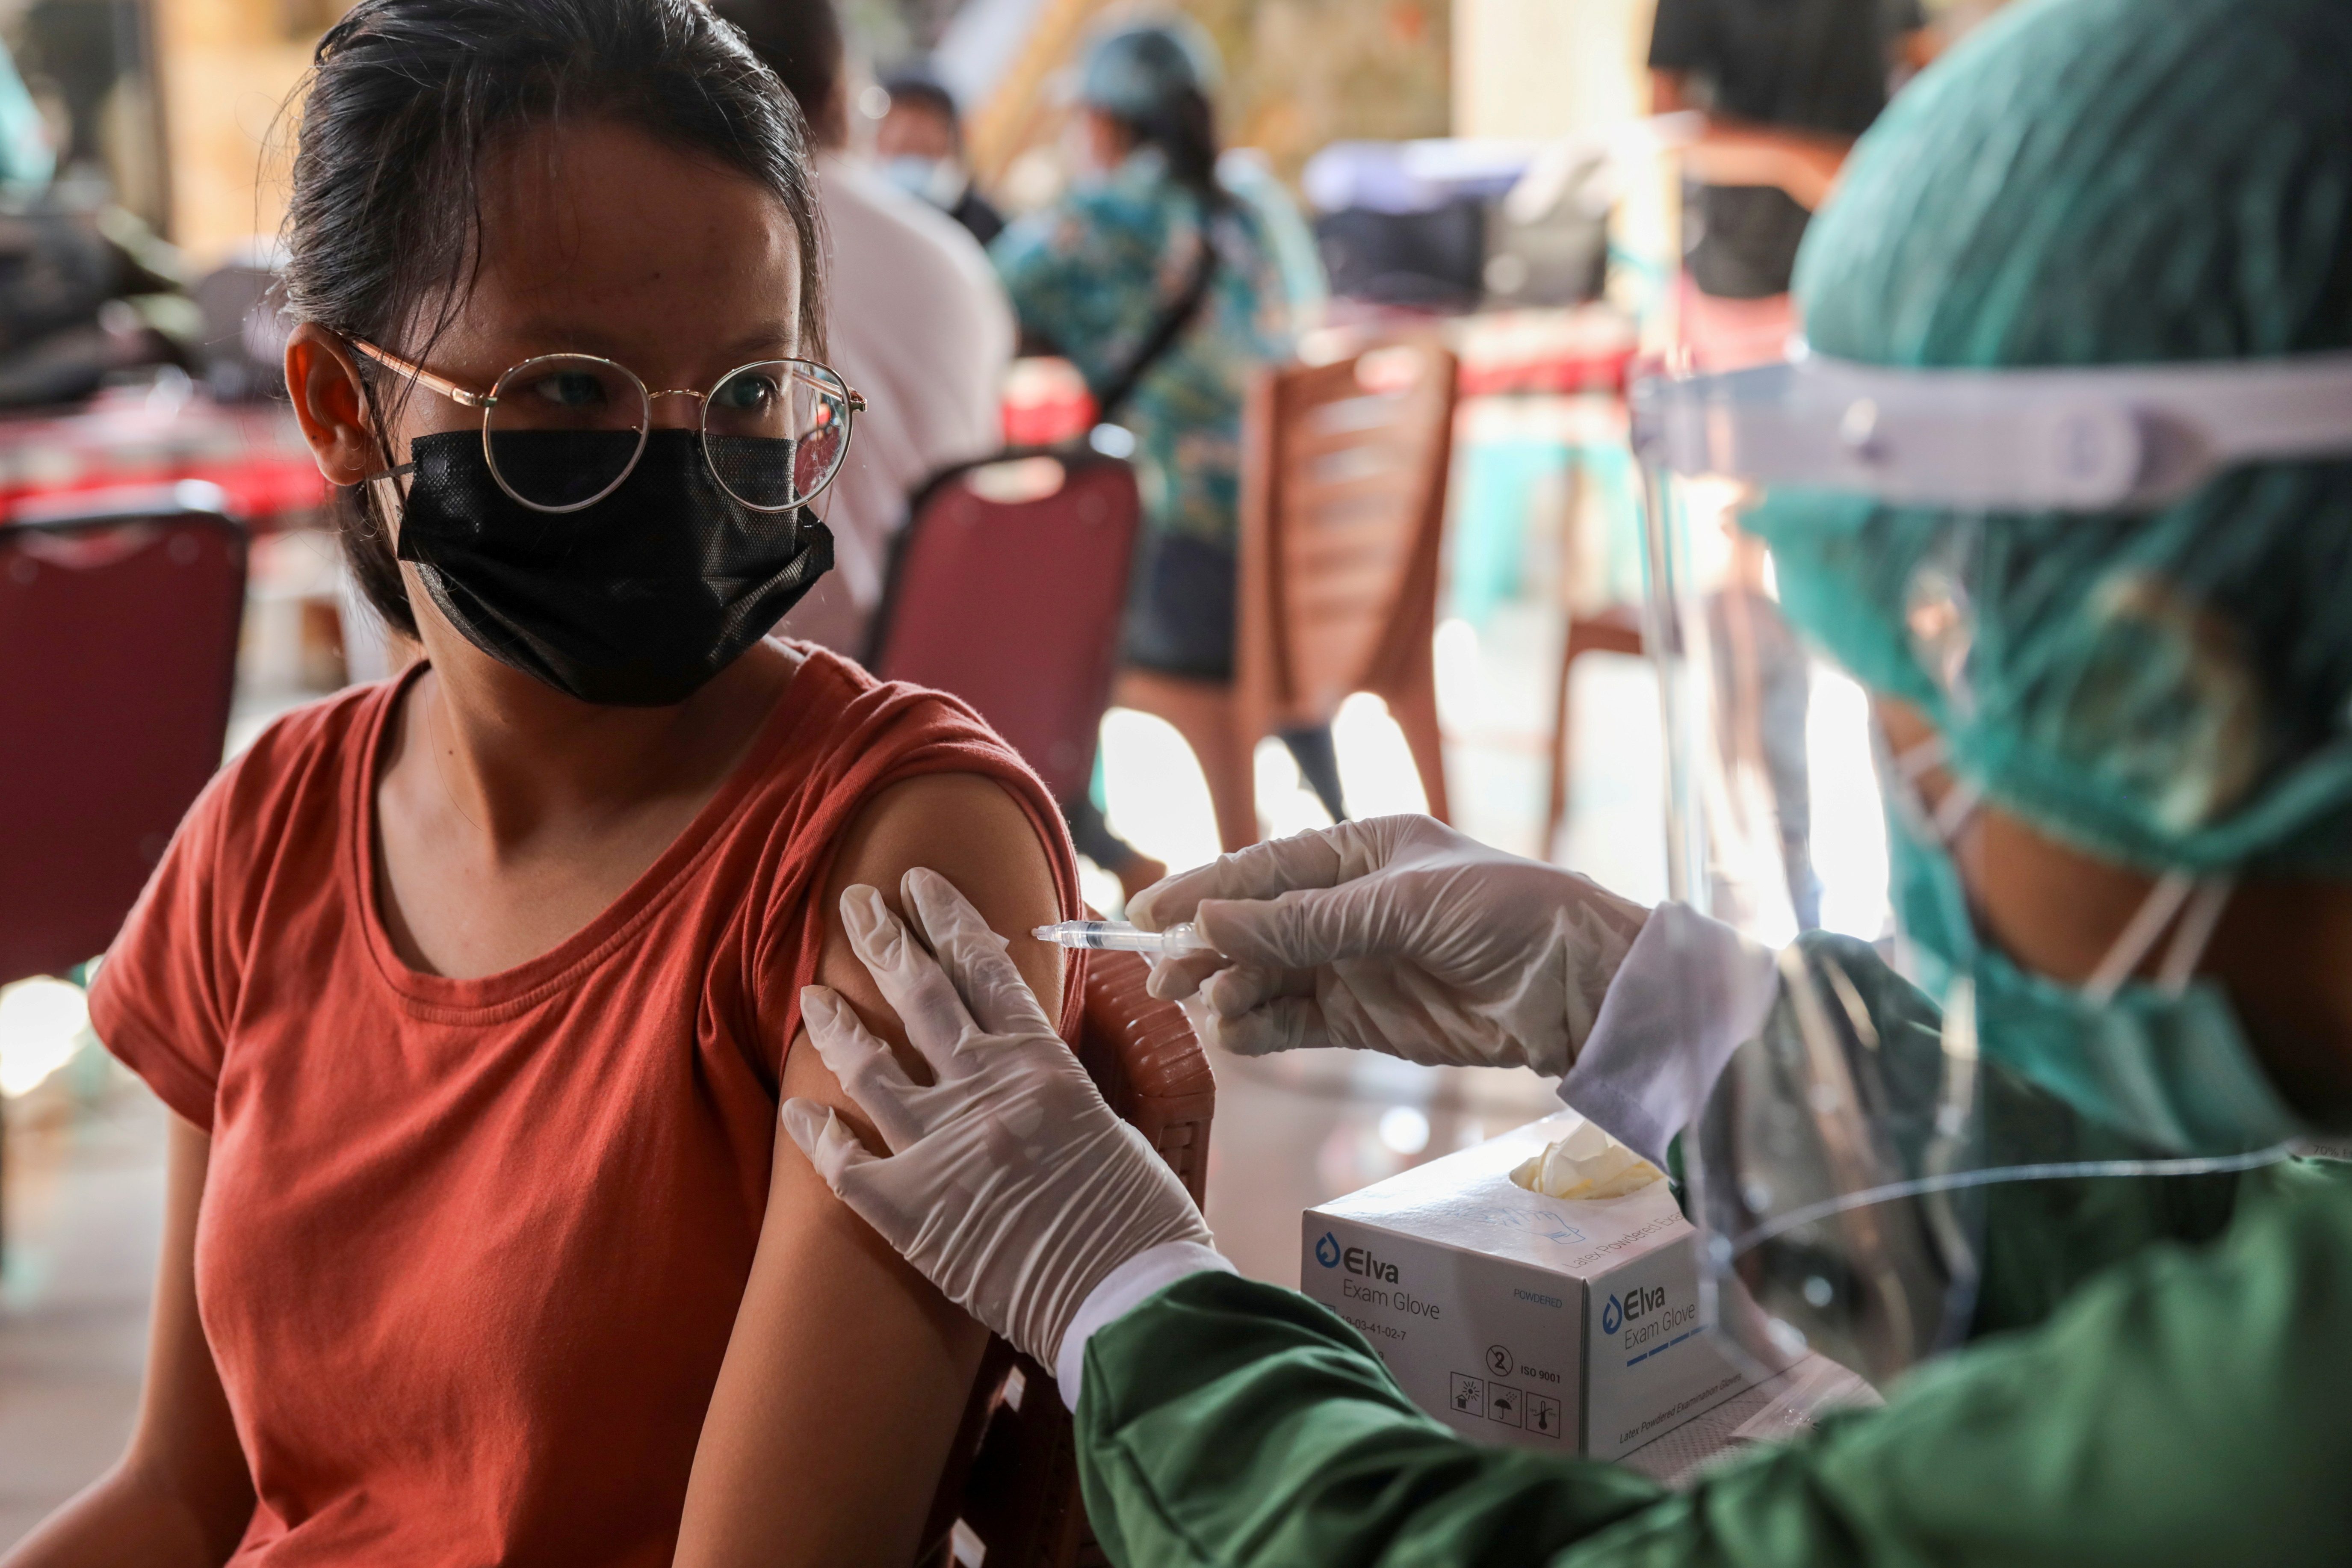 Indonesia sees vaccination slowdown as India delays shipments